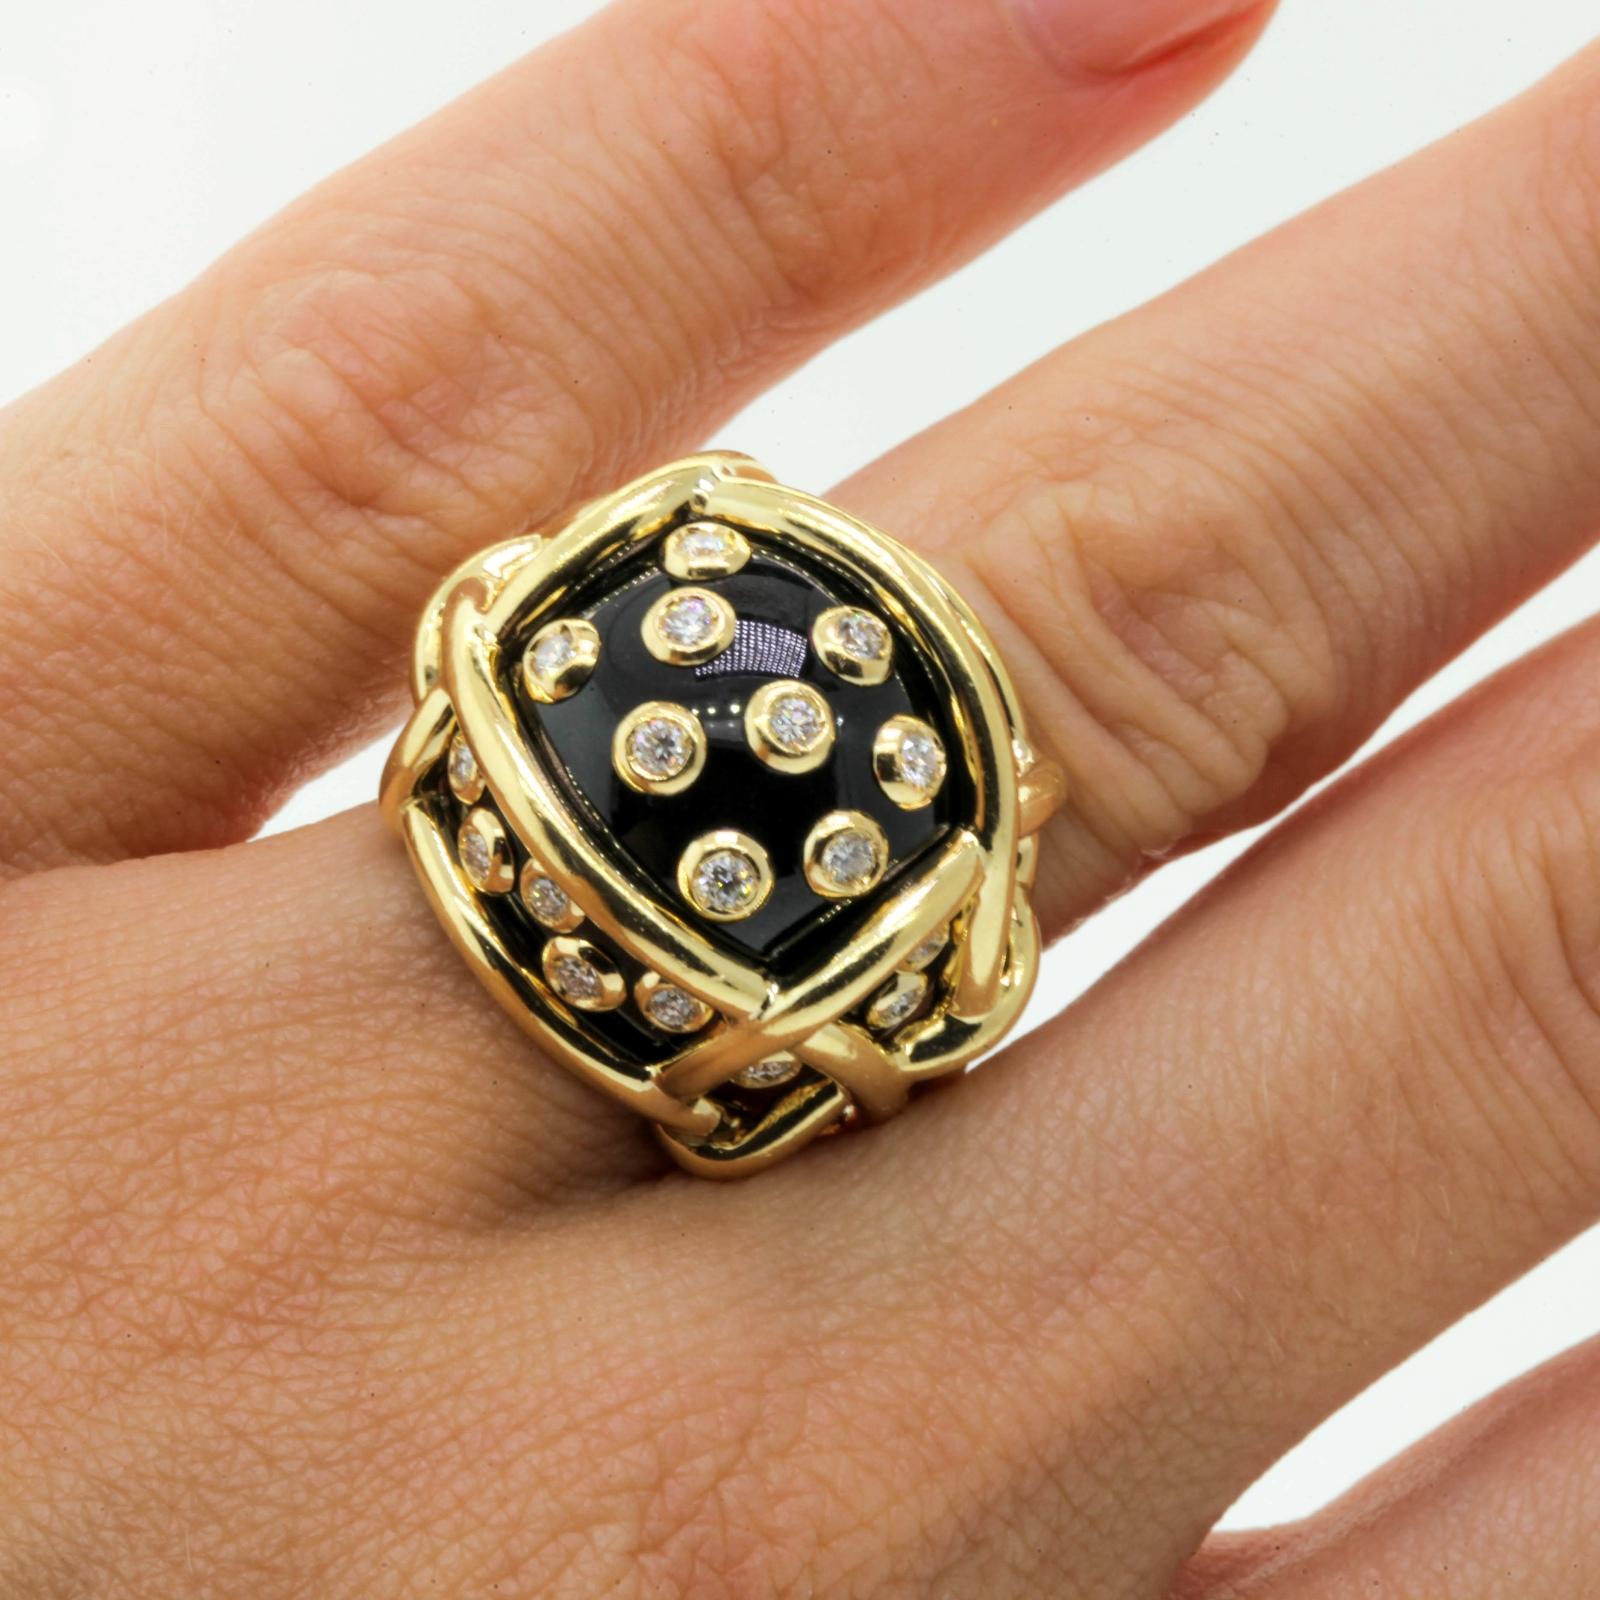 One of Fulco  di Verdura's classic and earliest designs, this fun and very wearable beauty, the Polka Dot ring is fabricated in 18KT yellow gold of Black Jade encrusted with twenty seven Round Brilliant Cut Diamonds set in gold colletes.  The ring